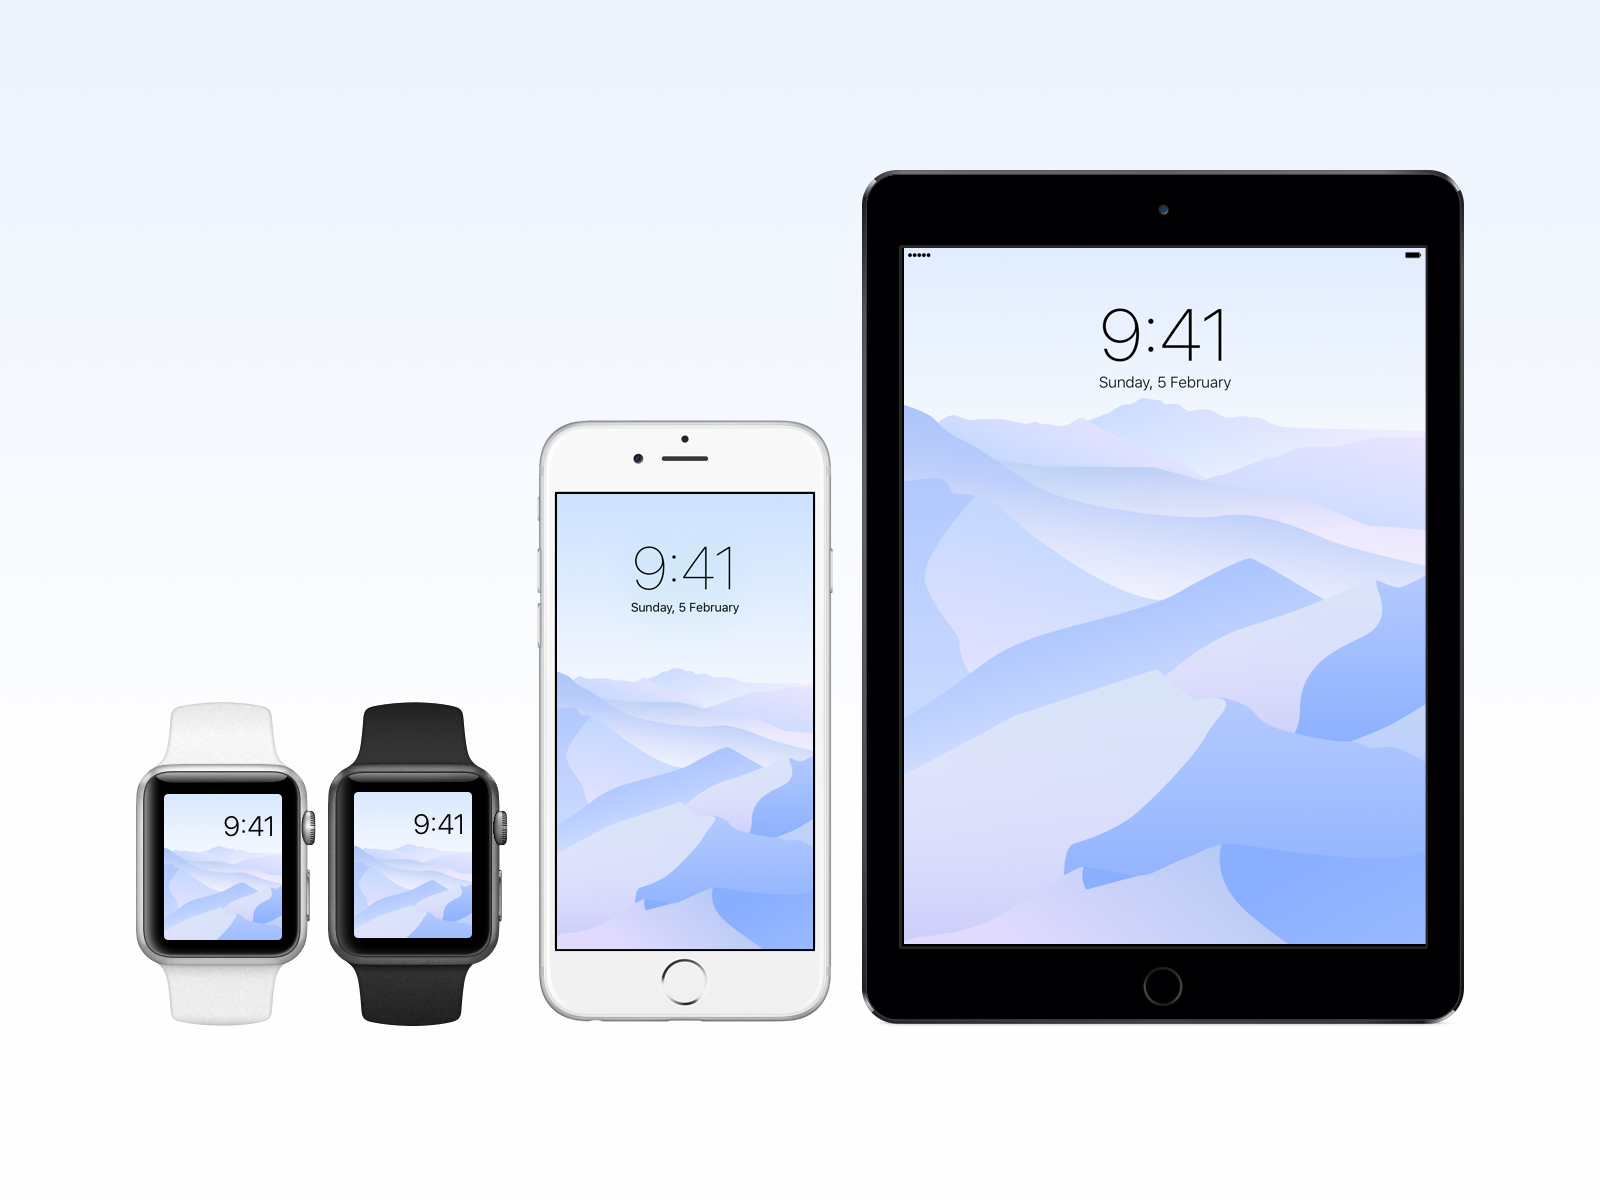 Mobiledevices